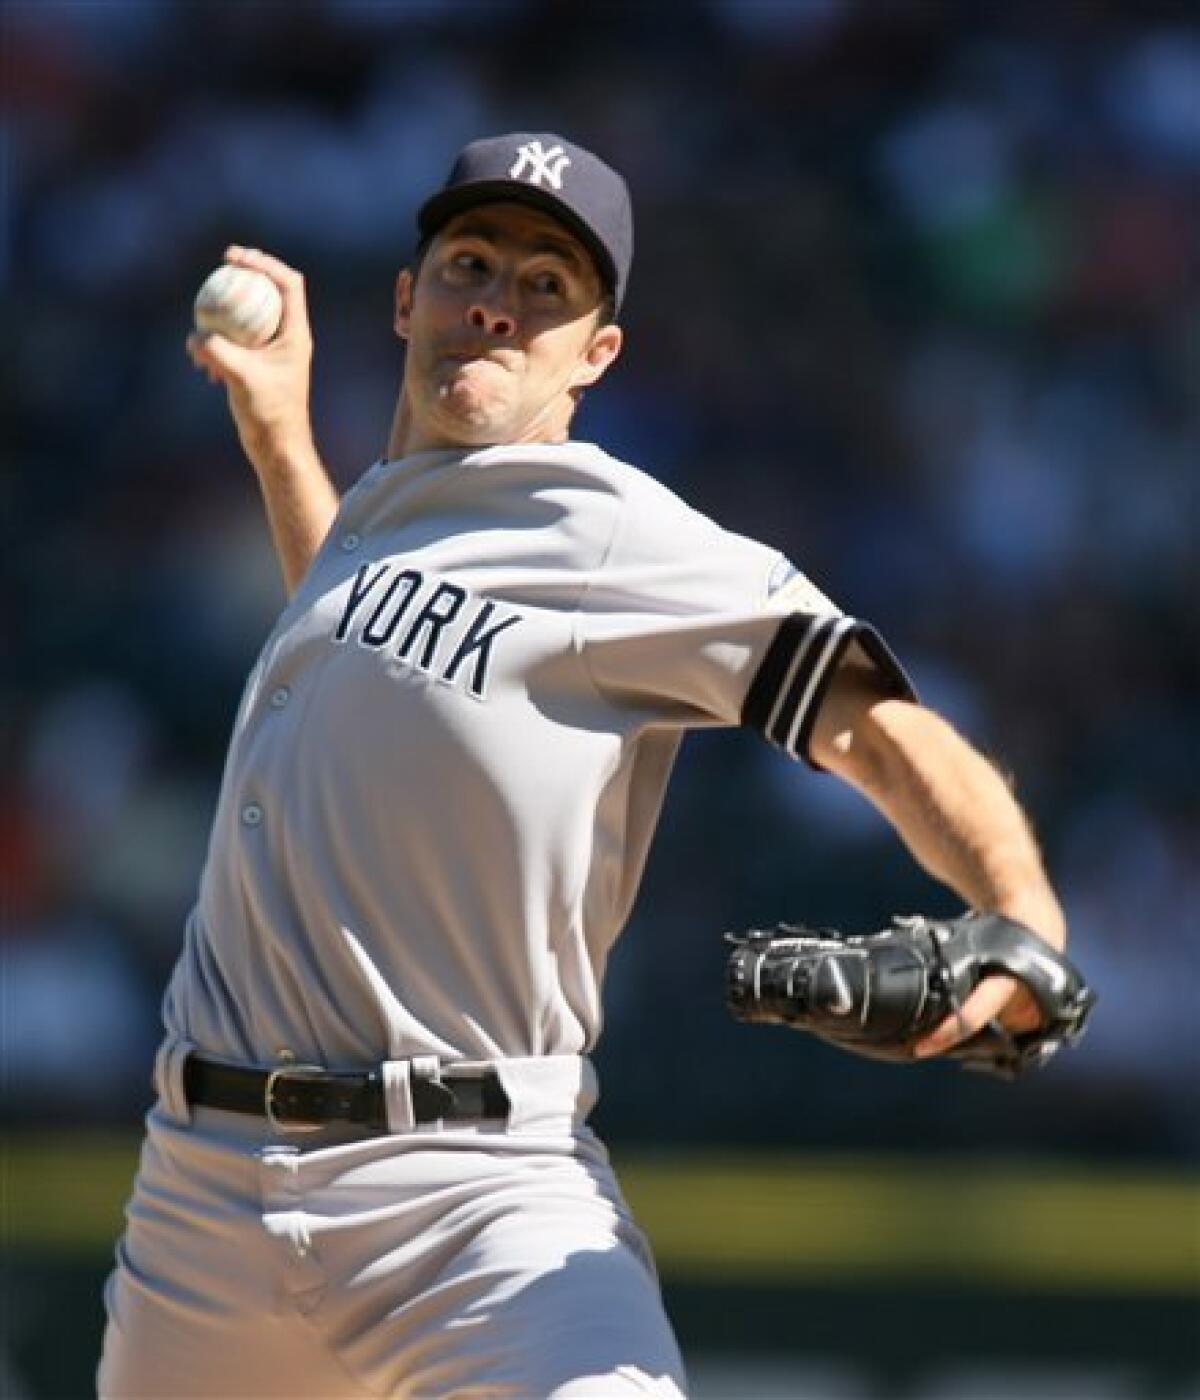 Yankees' Mussina Makes His Retirement Official - The New York Times